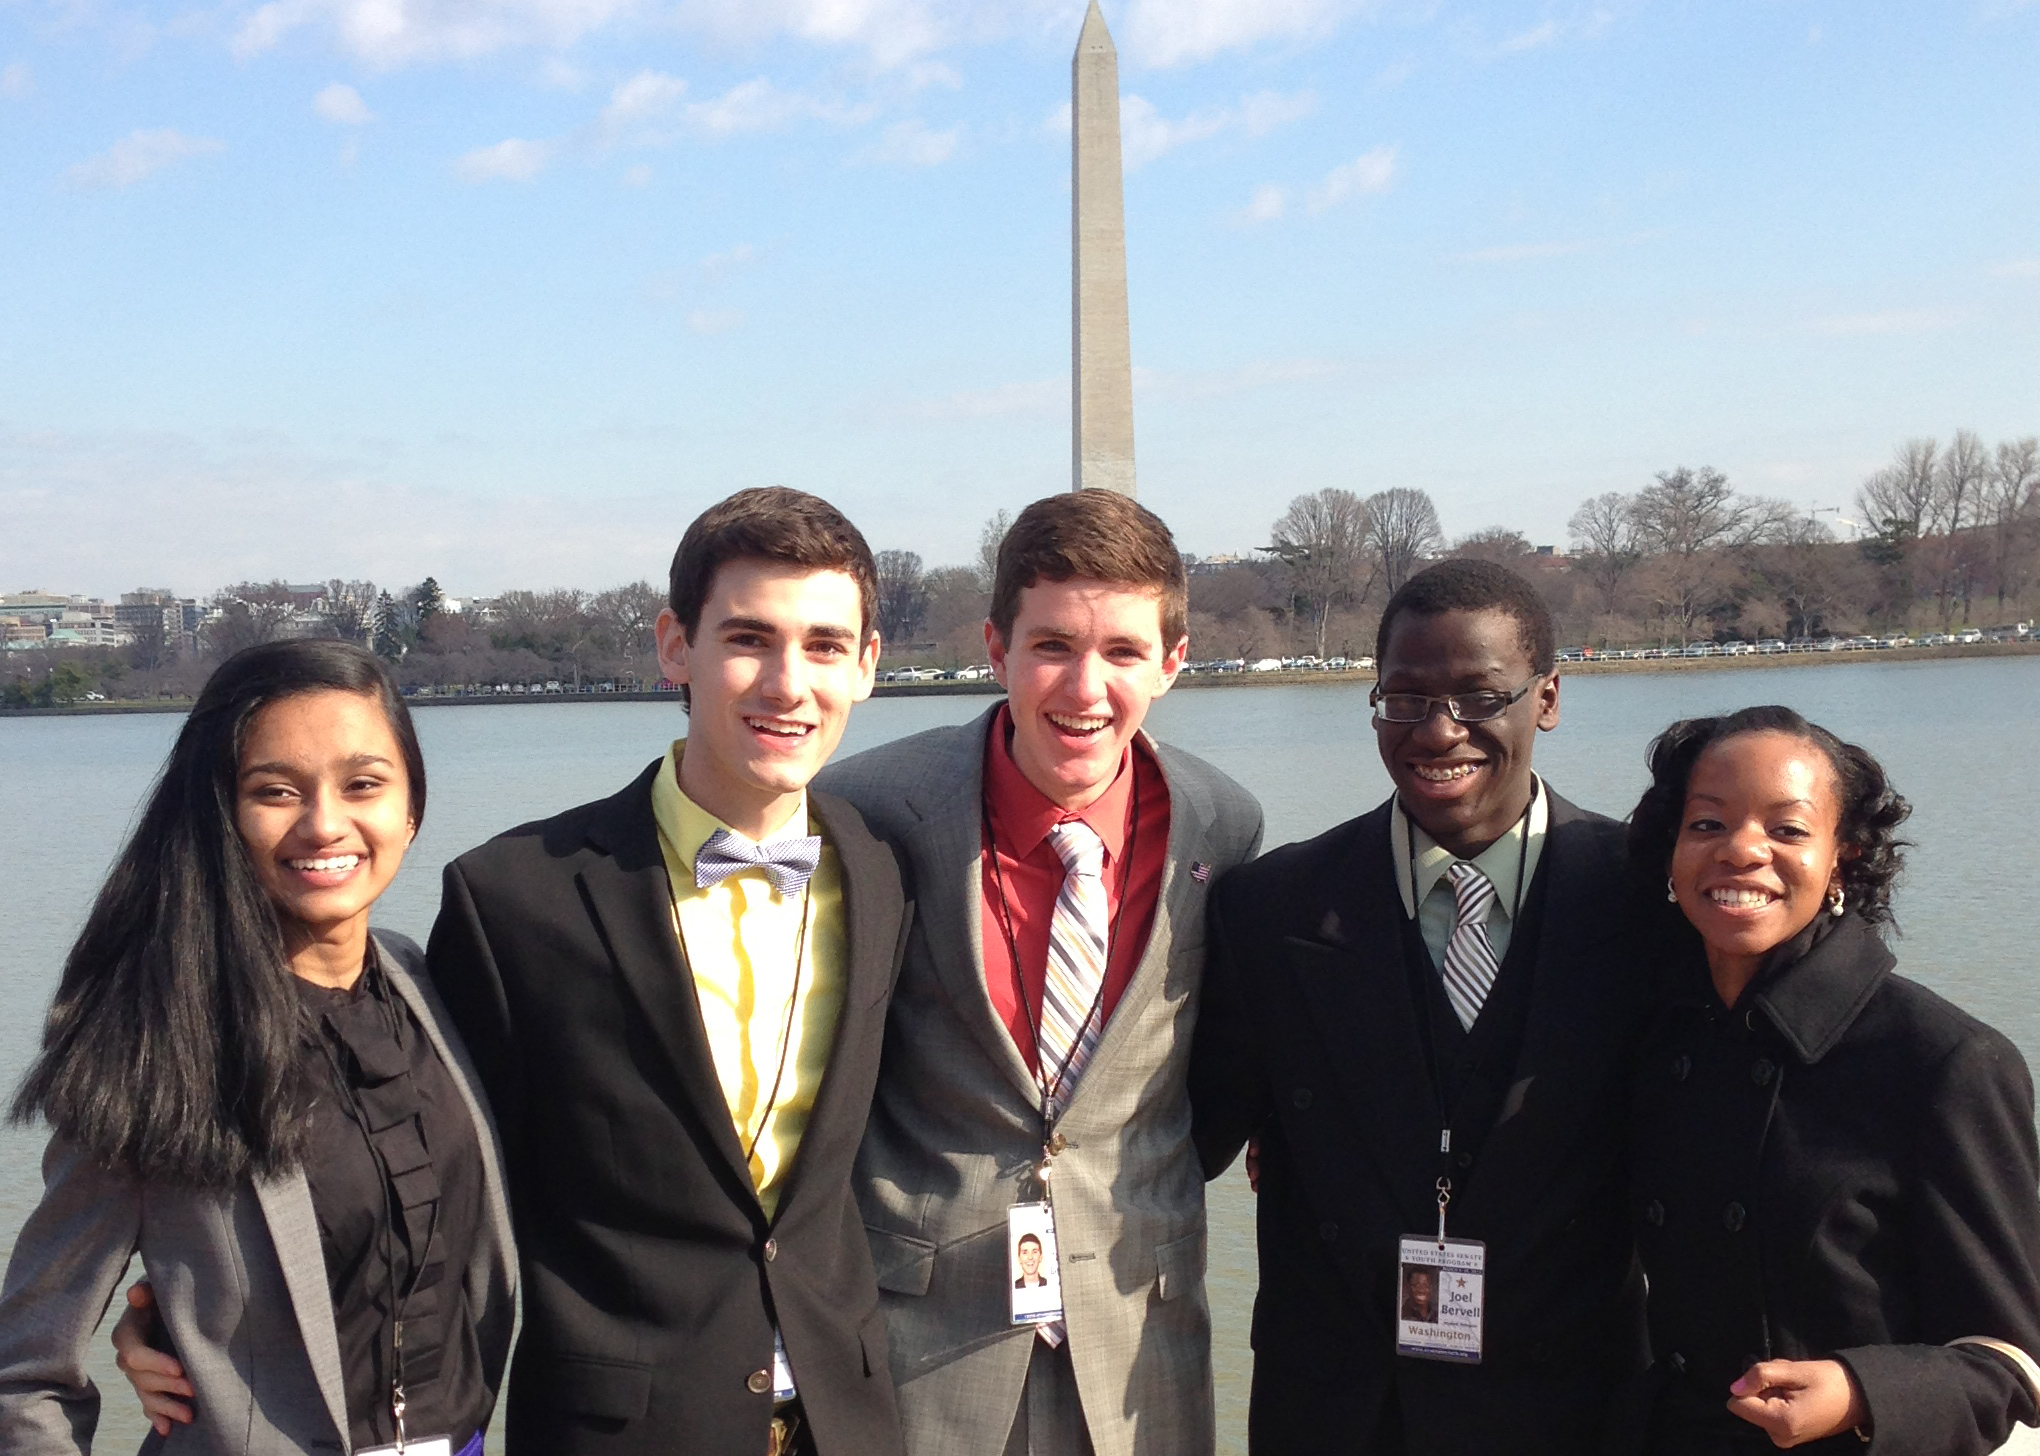 2013 Coke Scholars, Anjali Fernandes, Eric Beeler, Zach Bequette, Joel Bervell and Olivia Castor, met up in Washington, DC recently and took this photo.  They all happened to be there as part of the United States Senate Youth Program!